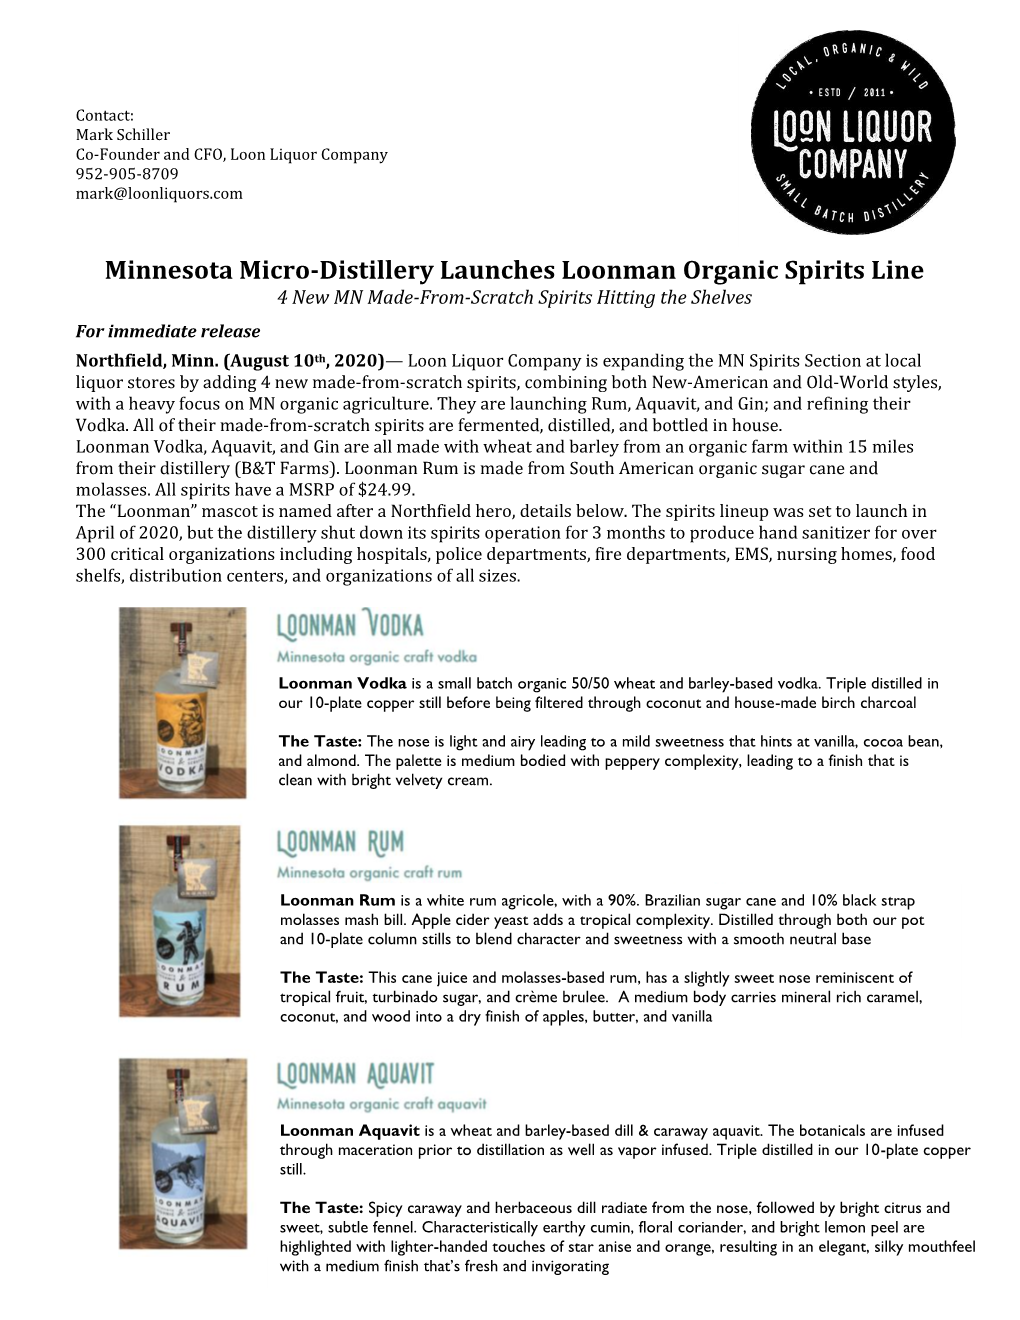 Minnesota Micro-Distillery Launches Loonman Organic Spirits Line 4 New MN Made-From-Scratch Spirits Hitting the Shelves